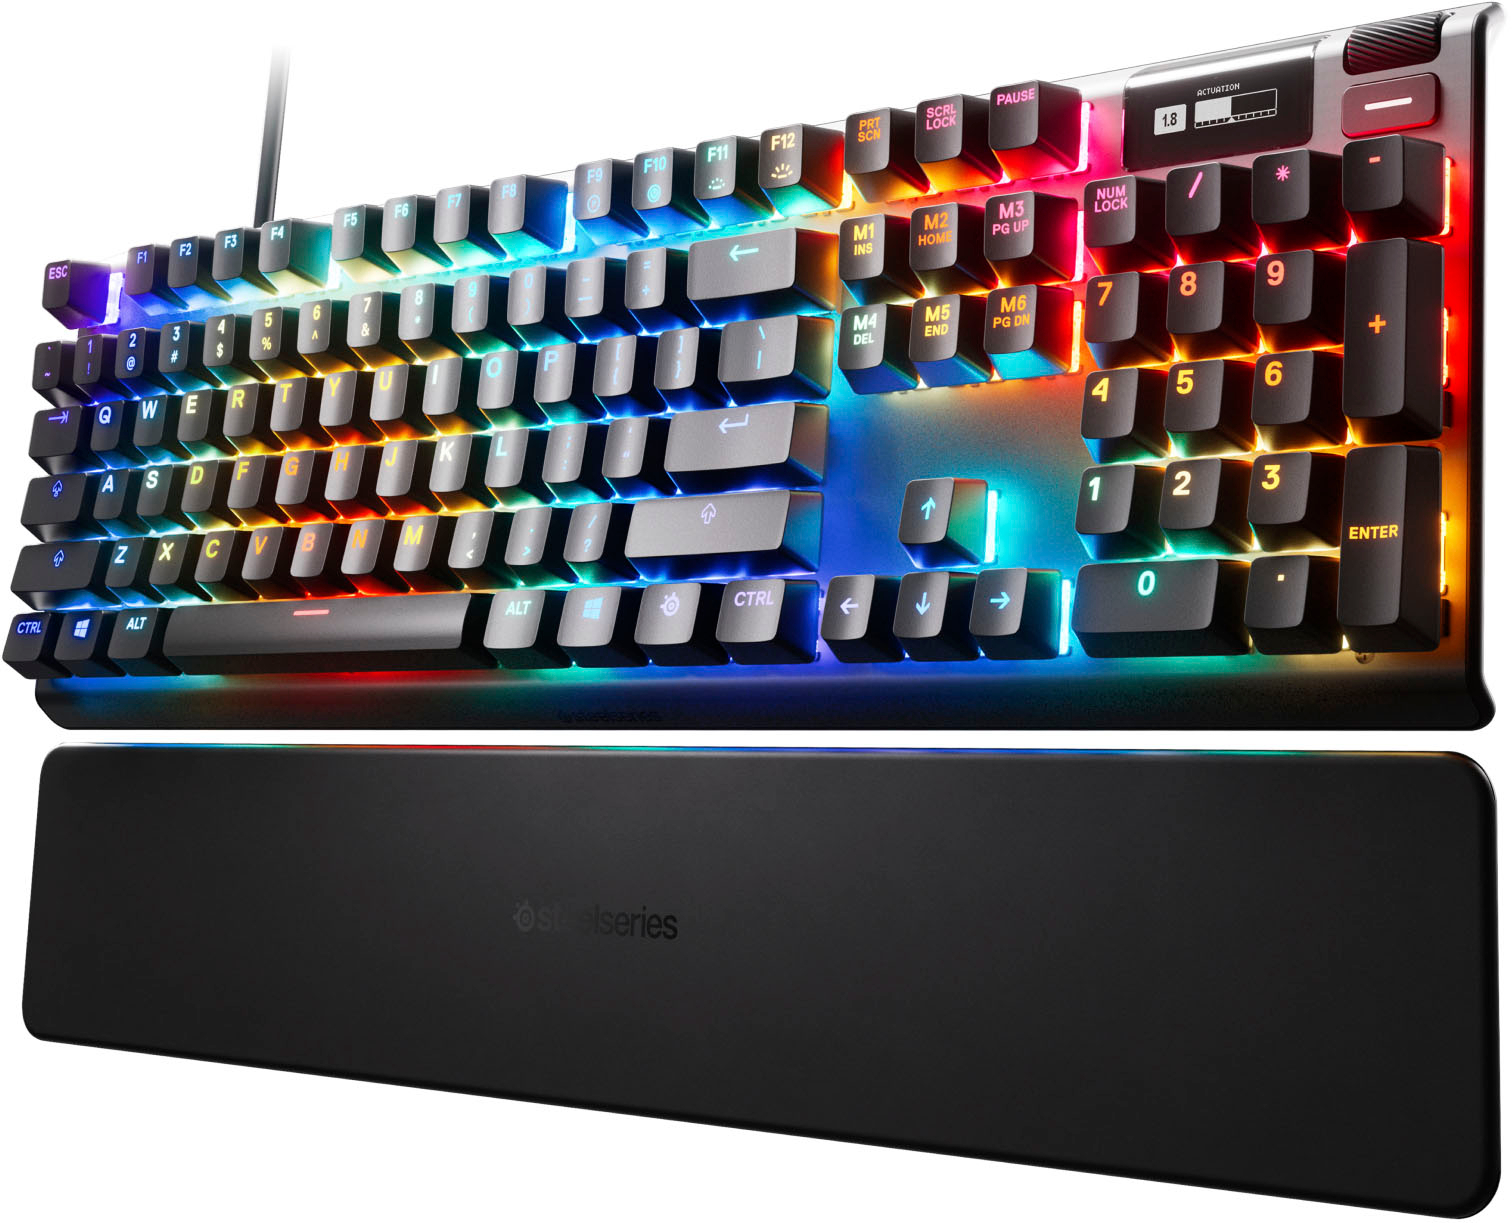 SteelSeries Apex Pro Mechanical Gaming Keyboard World’s Fastest Mechanical Keyboard RGB Backlit Adjustable Actuation Switches OLED Smart Display 